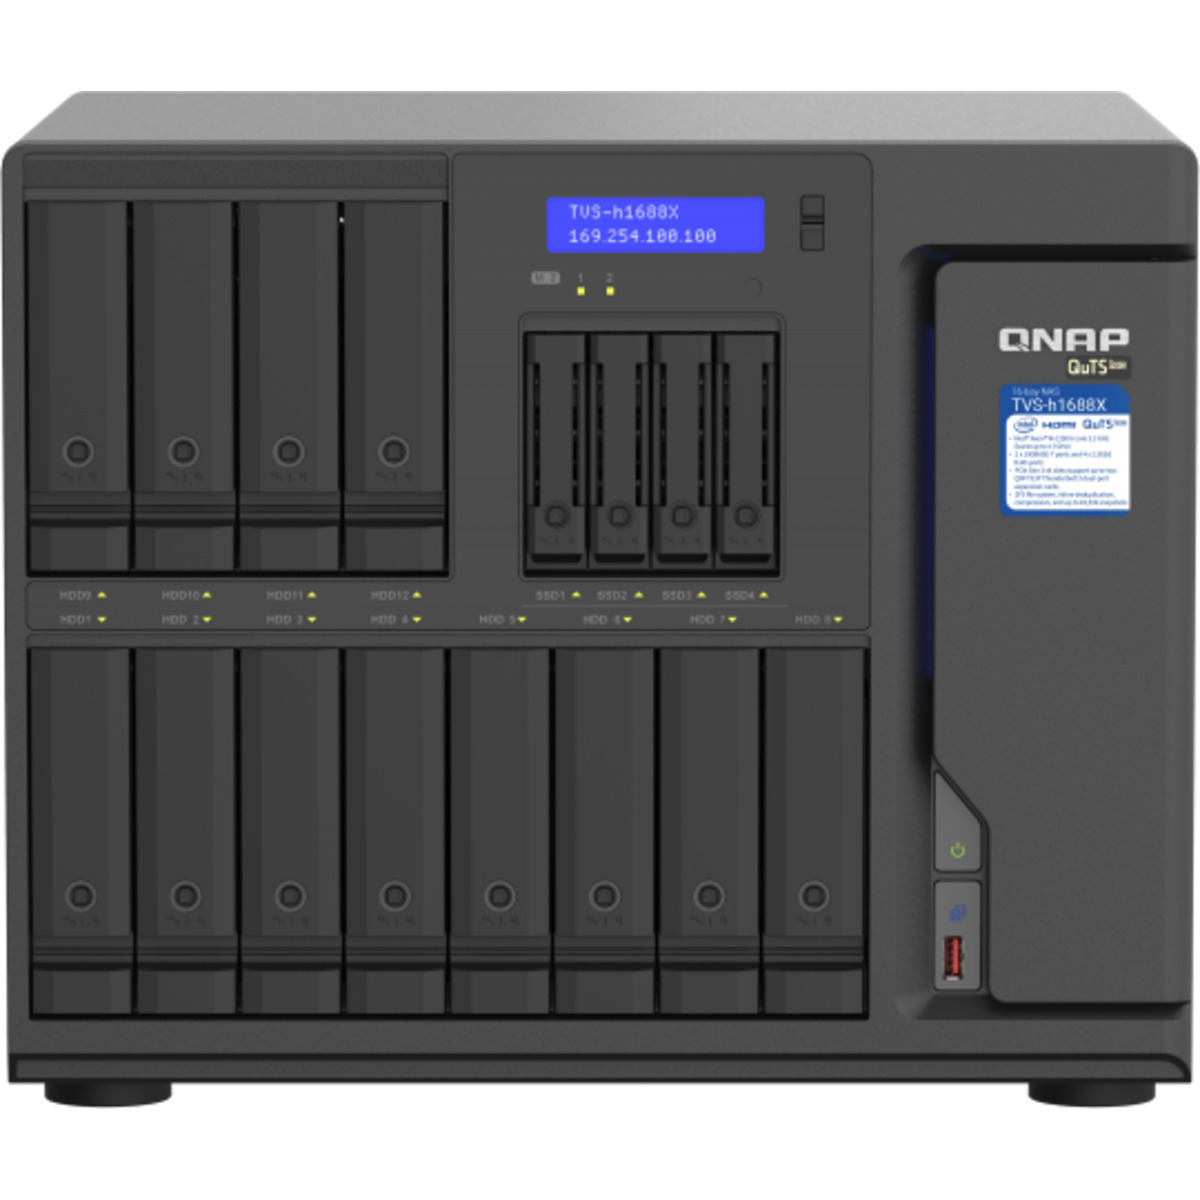 QNAP TVS-h1688X QuTS hero NAS 48tb 12+4-Bay Desktop Multimedia / Power User / Business NAS - Network Attached Storage Device 8x6tb Western Digital Red Pro WD6005FFBX 3.5 7200rpm SATA 6Gb/s HDD NAS Class Drives Installed - Burn-In Tested TVS-h1688X QuTS hero NAS